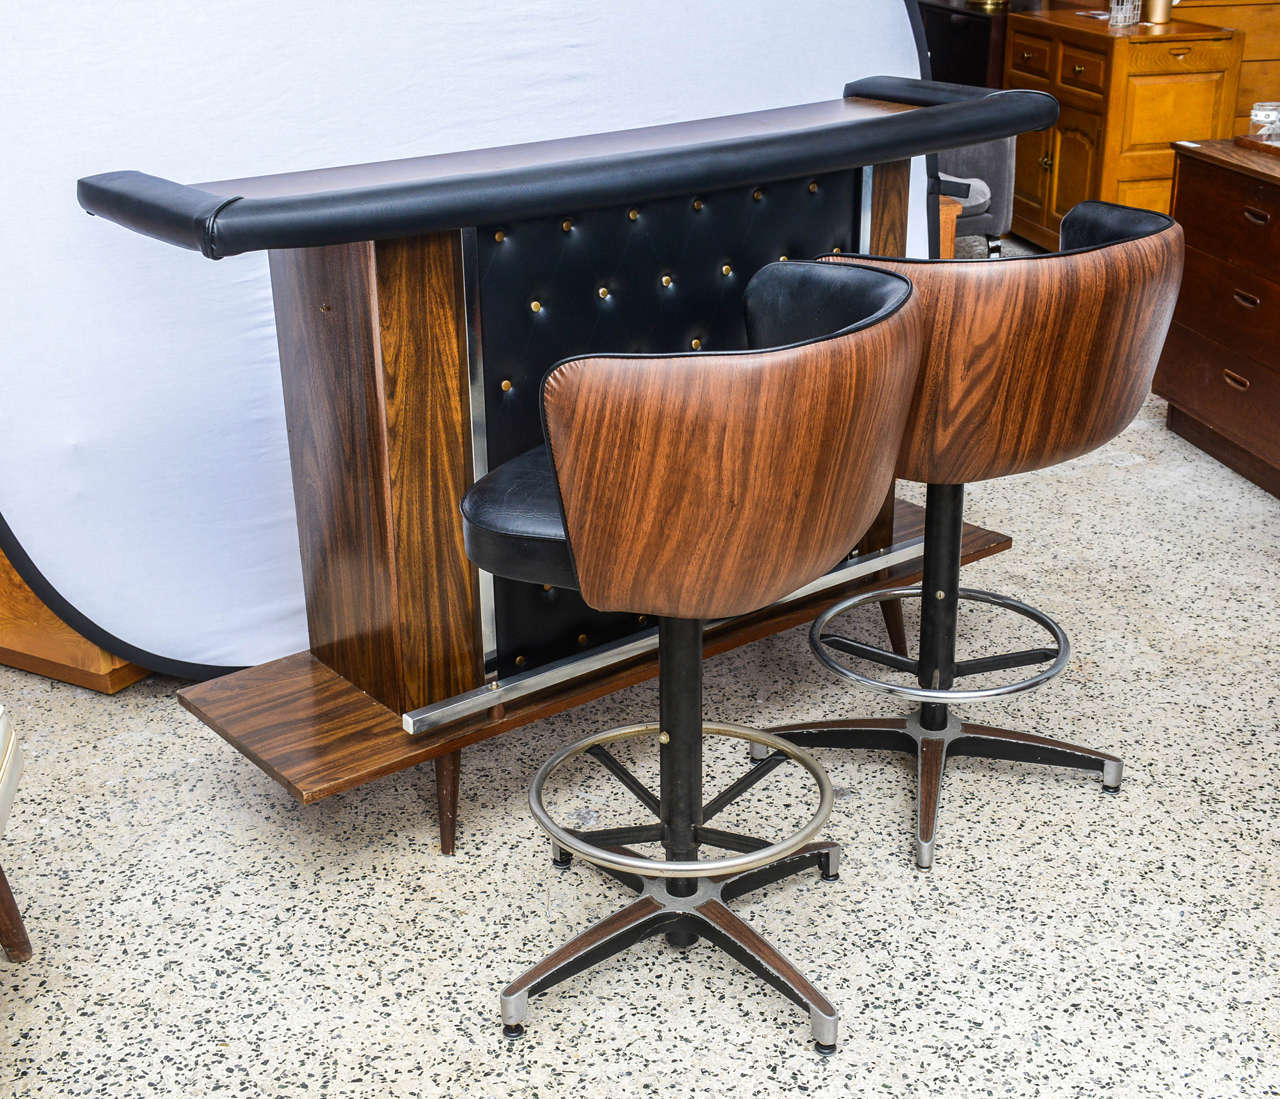 Wonderfully fun MCM Vintage bar set.  Perfect for any MCM home or man cave.  1950s USA

Bar comes with 2 matching stools.